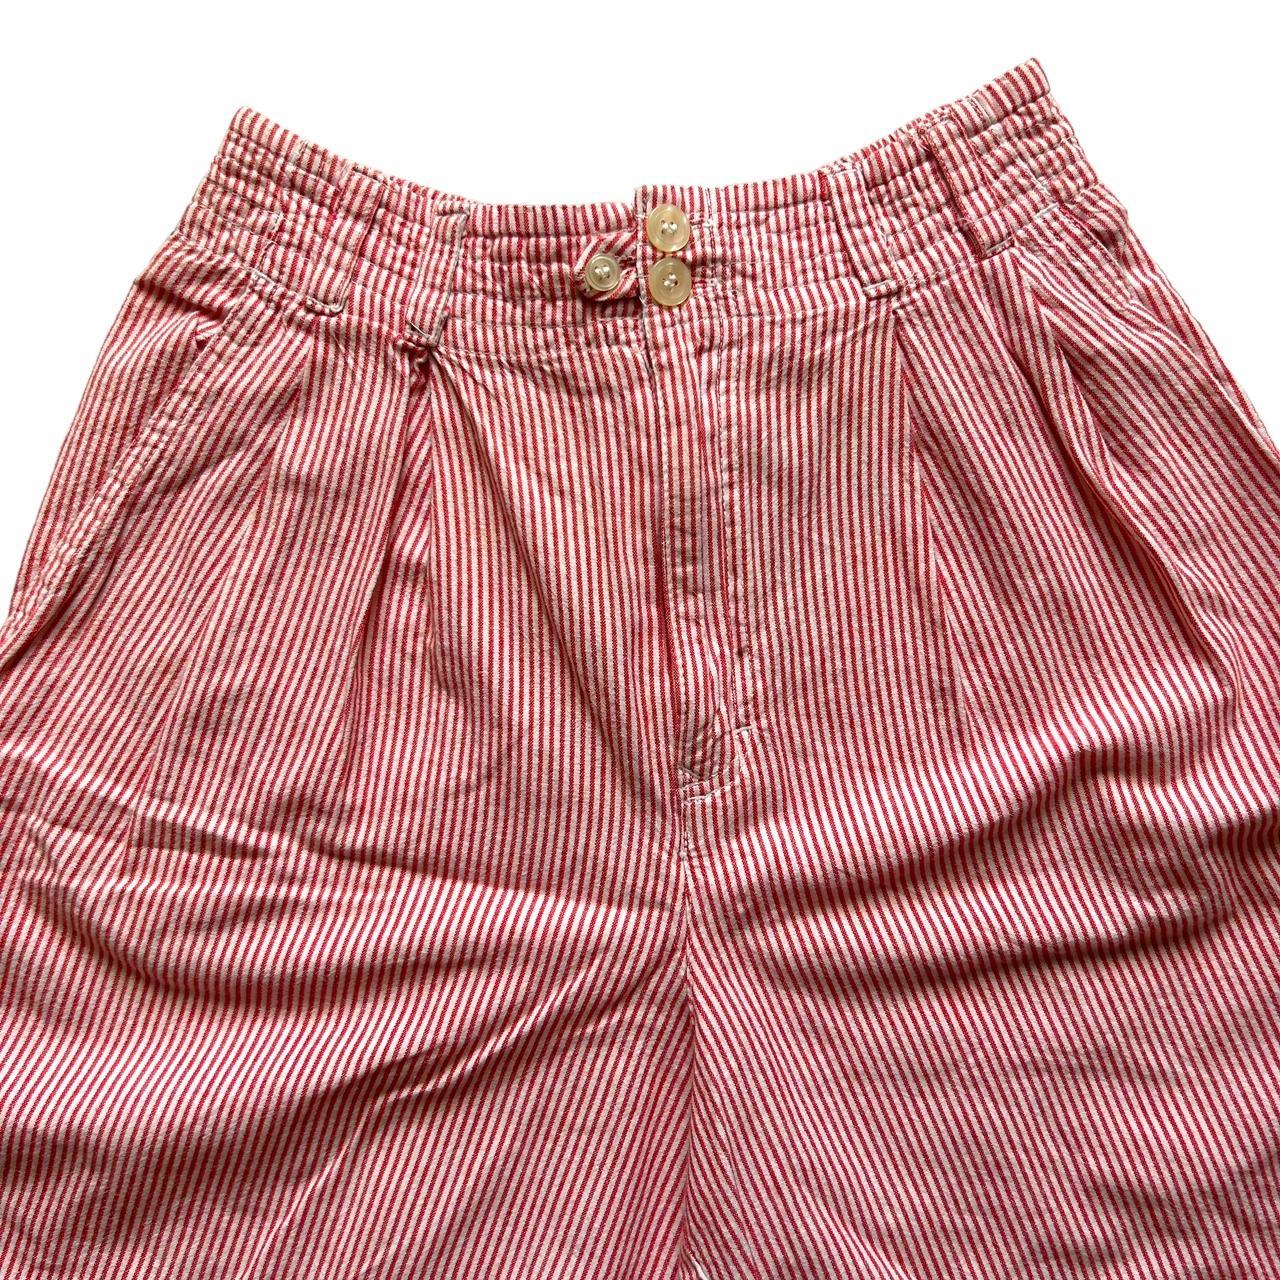 80s vintage red pinstripe shorts S